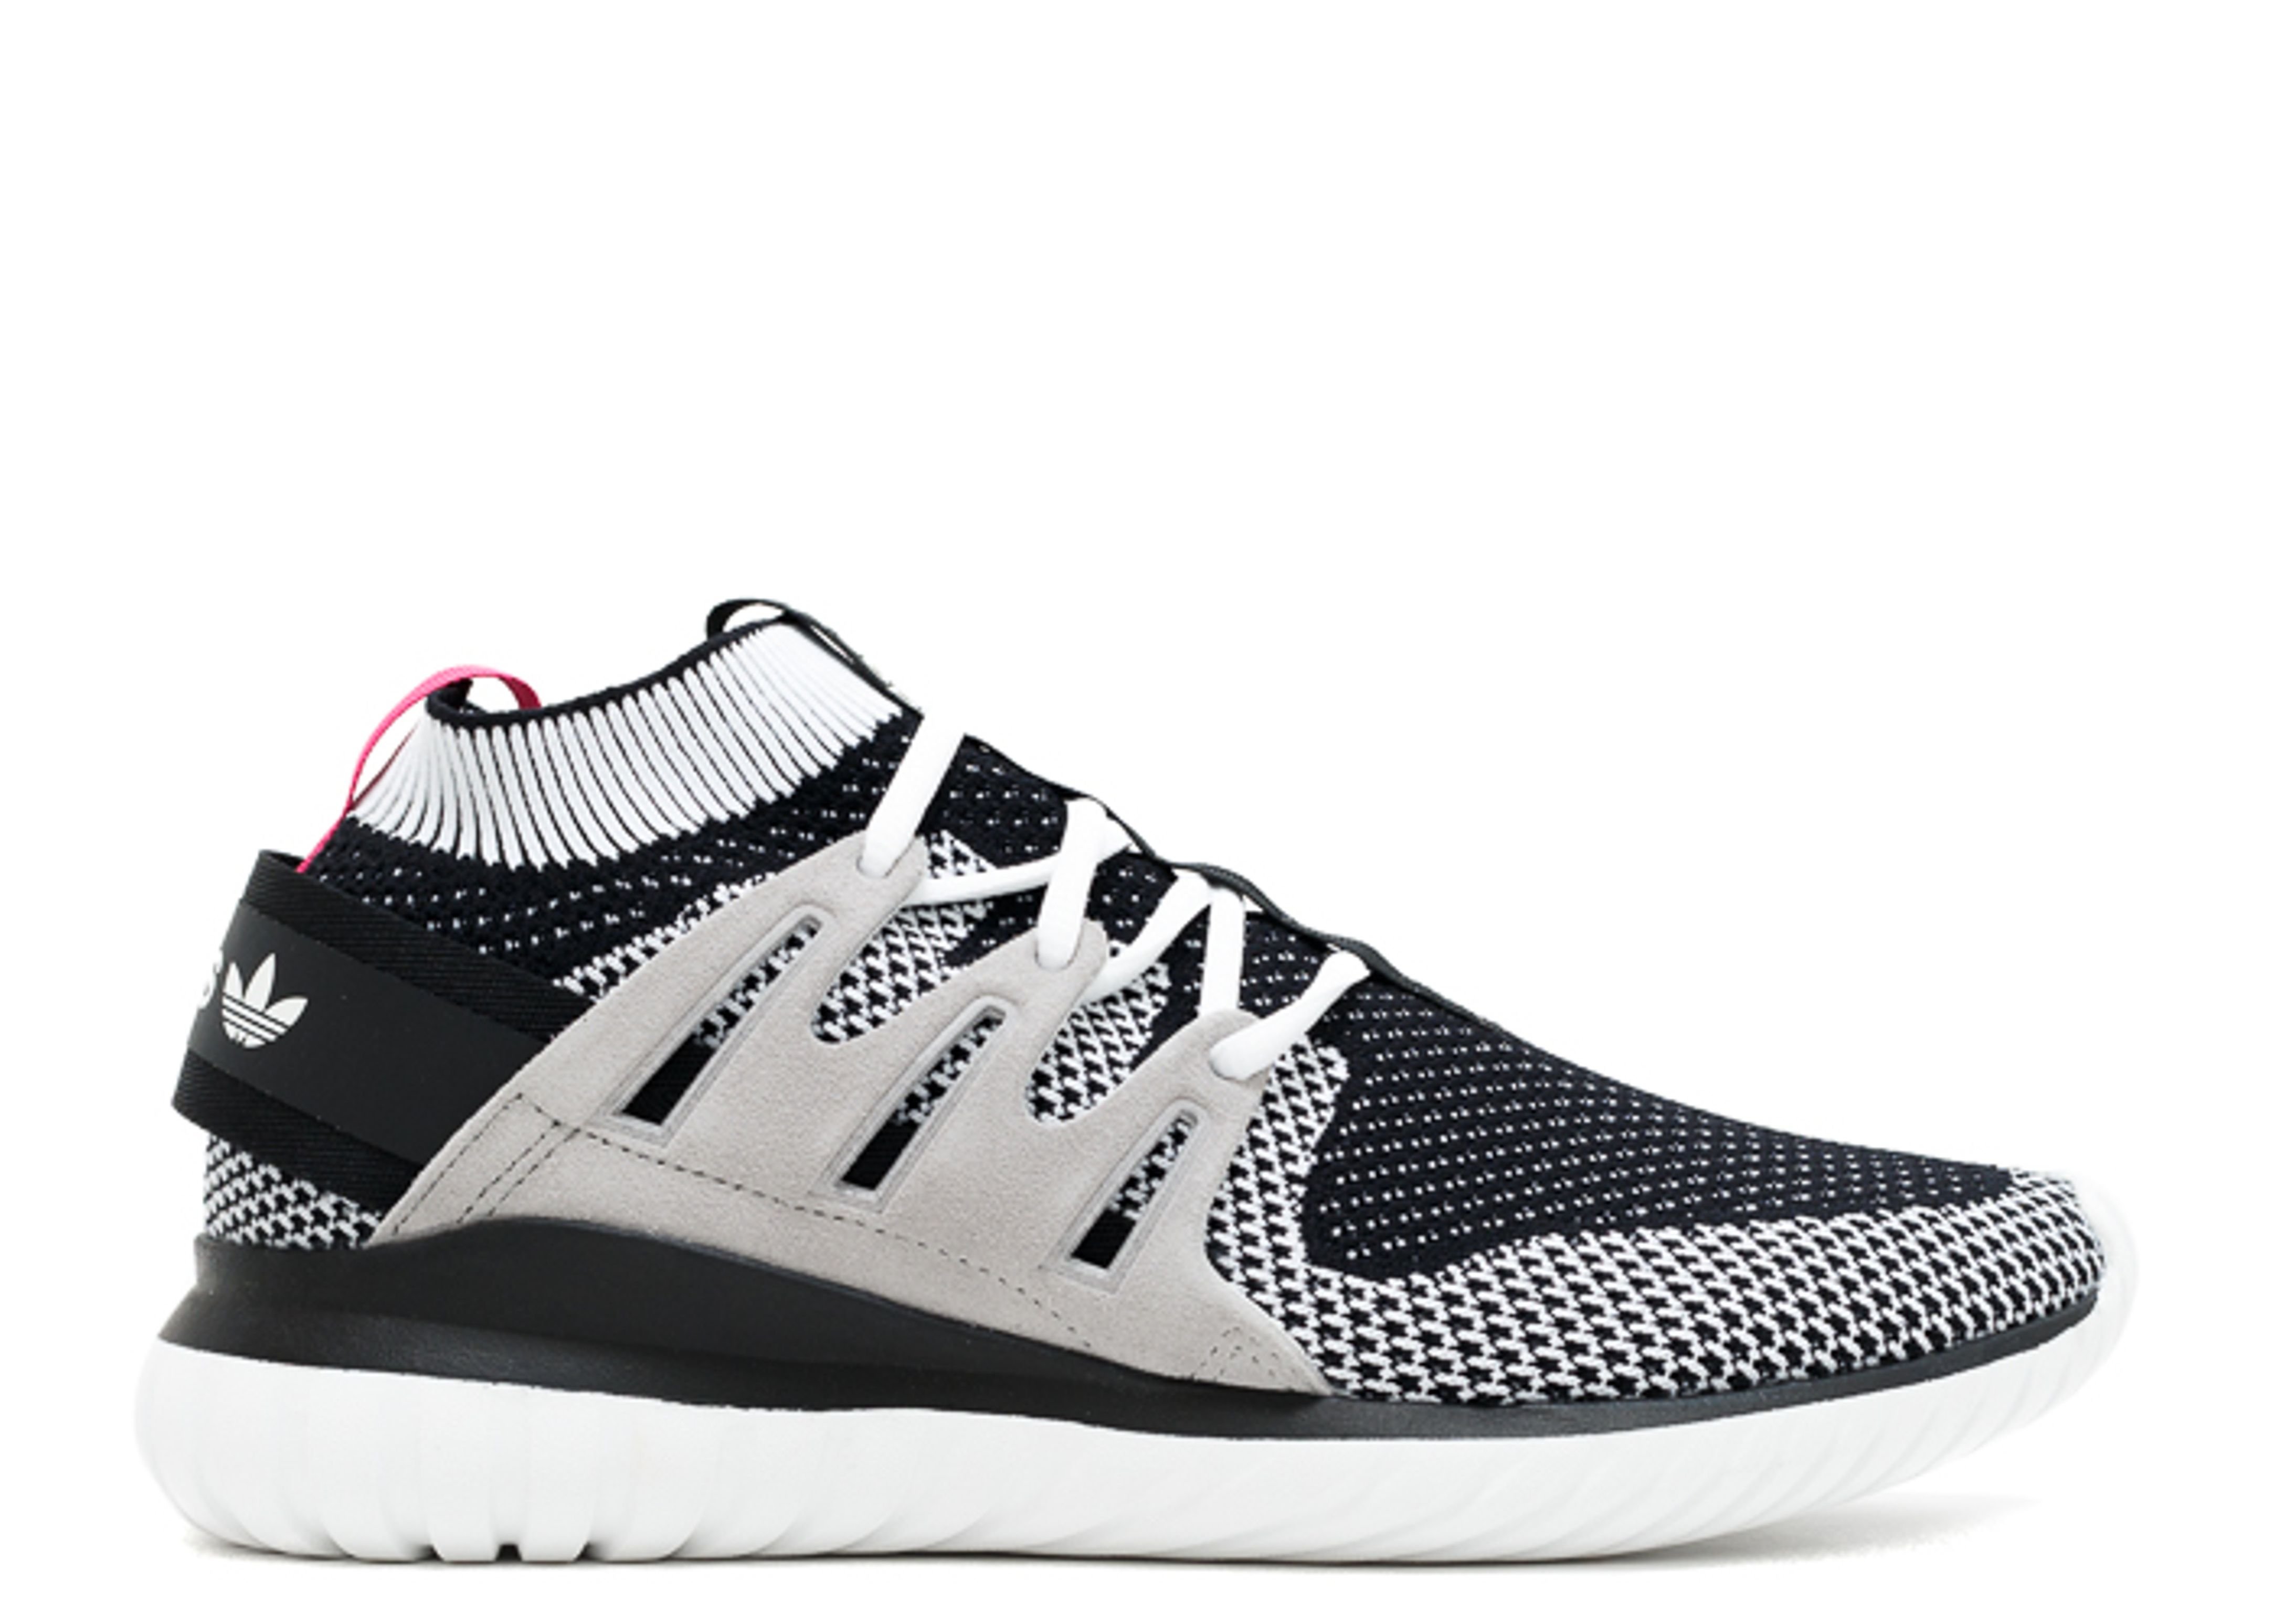 A Charcoal Colorway Of The adidas Tubular Radial